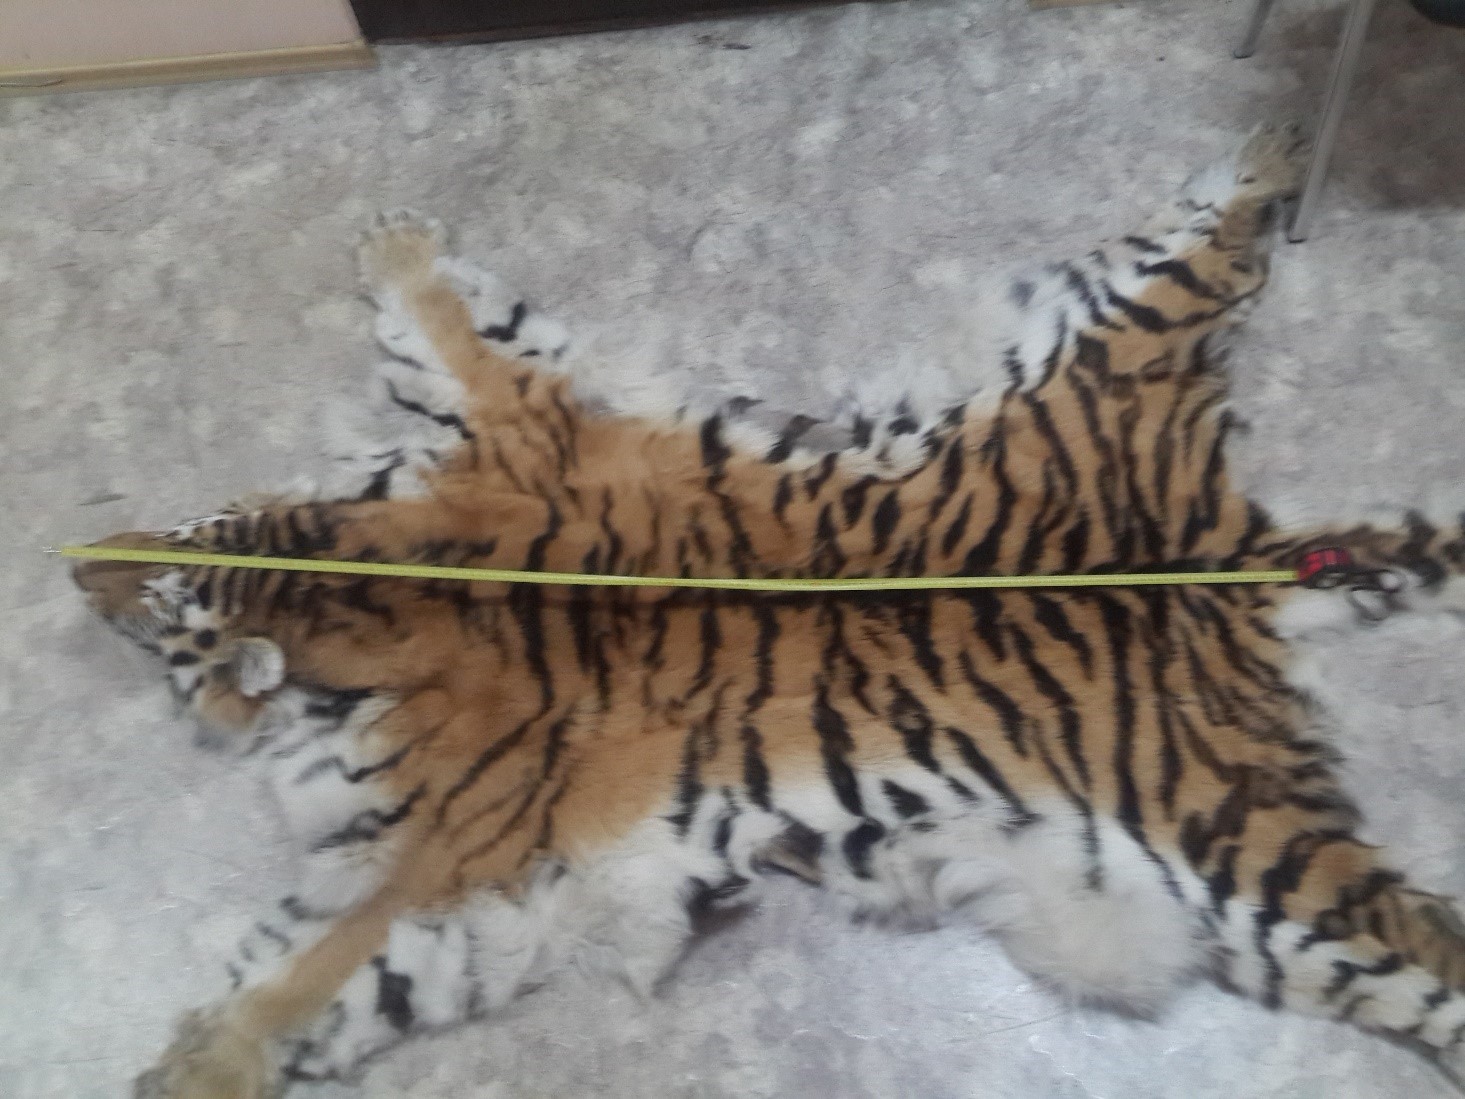 Four residents of Primorsky Krai can be punished for an attempt of selling an amur tiger pelt